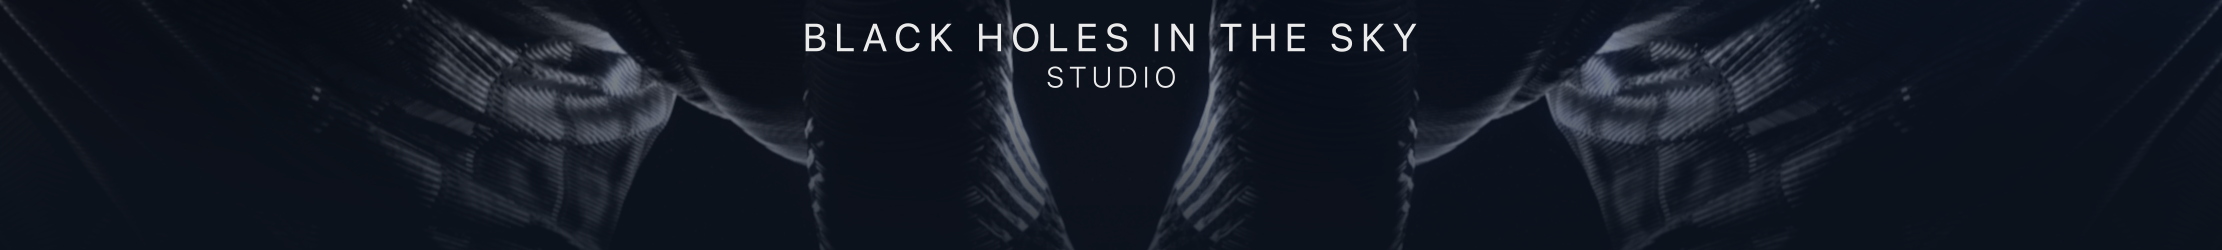 Black Holes in the Sky's profile banner